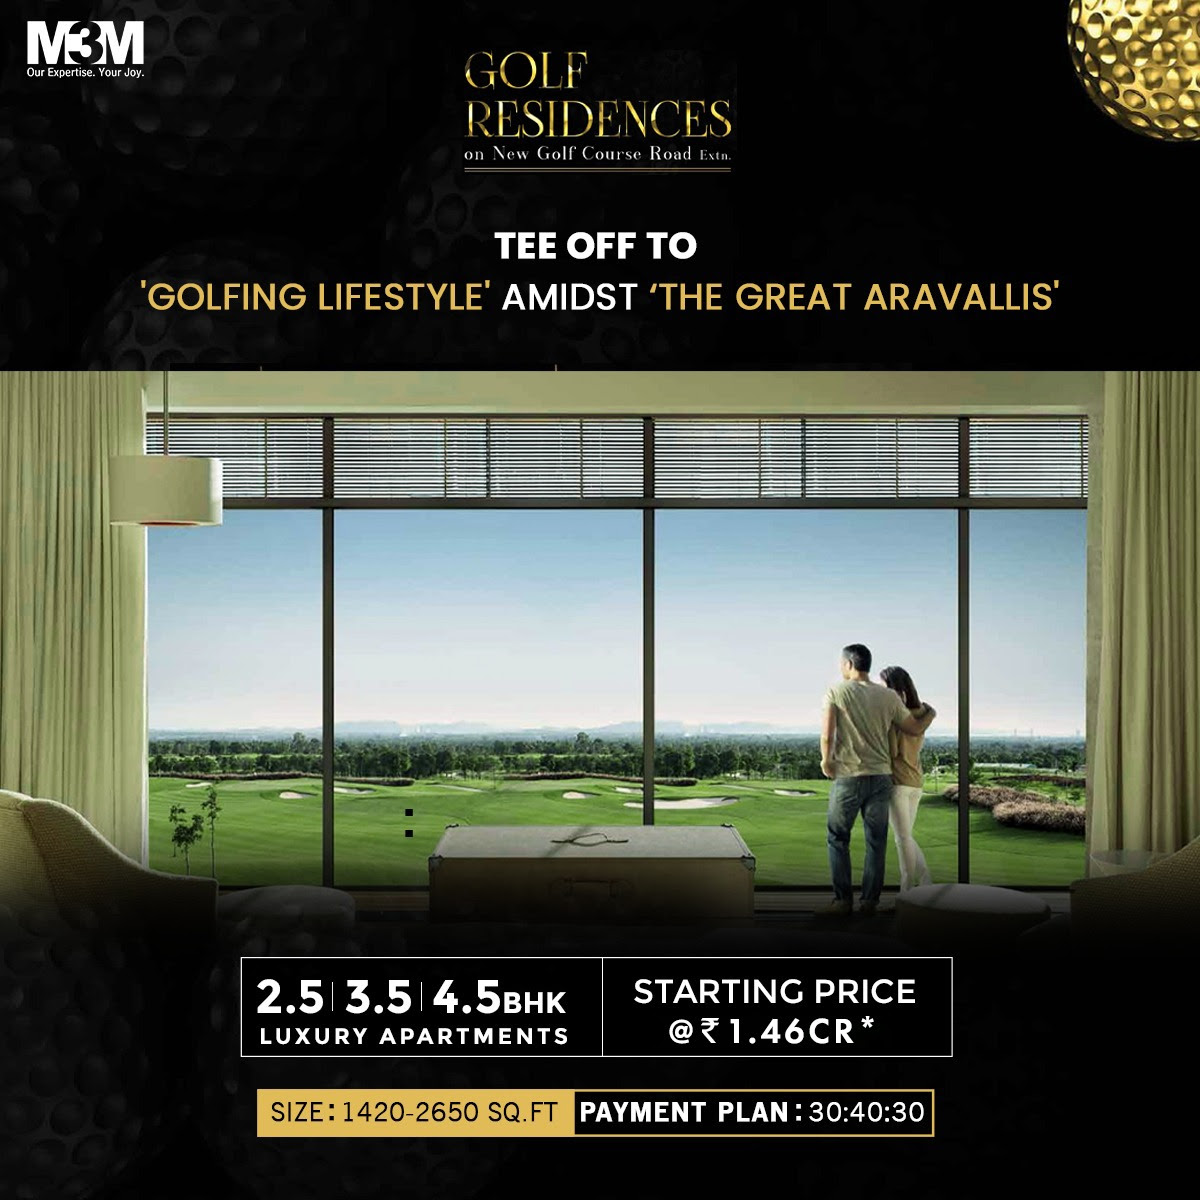 Presenting 30:40:30 payment plan at  M3M Golf Hills Phase 1, Gurgaon Update